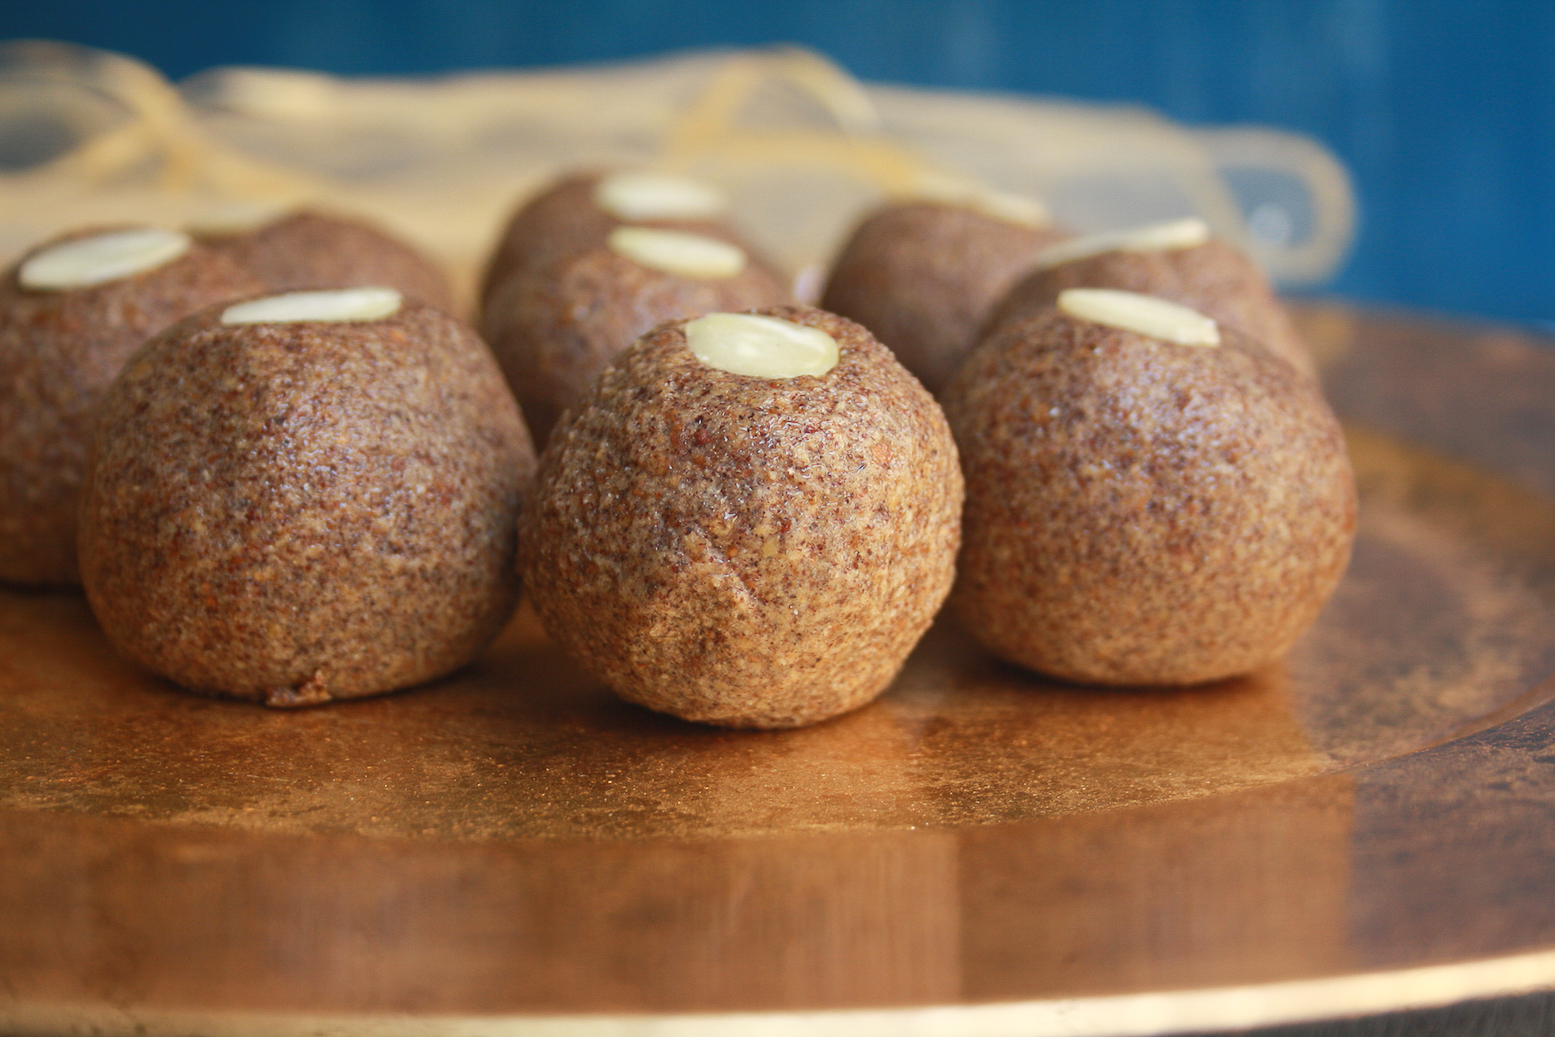 Healthier, wholegrain ragi laddoos made with oats, almonds and jaggery. Great for the festive season!